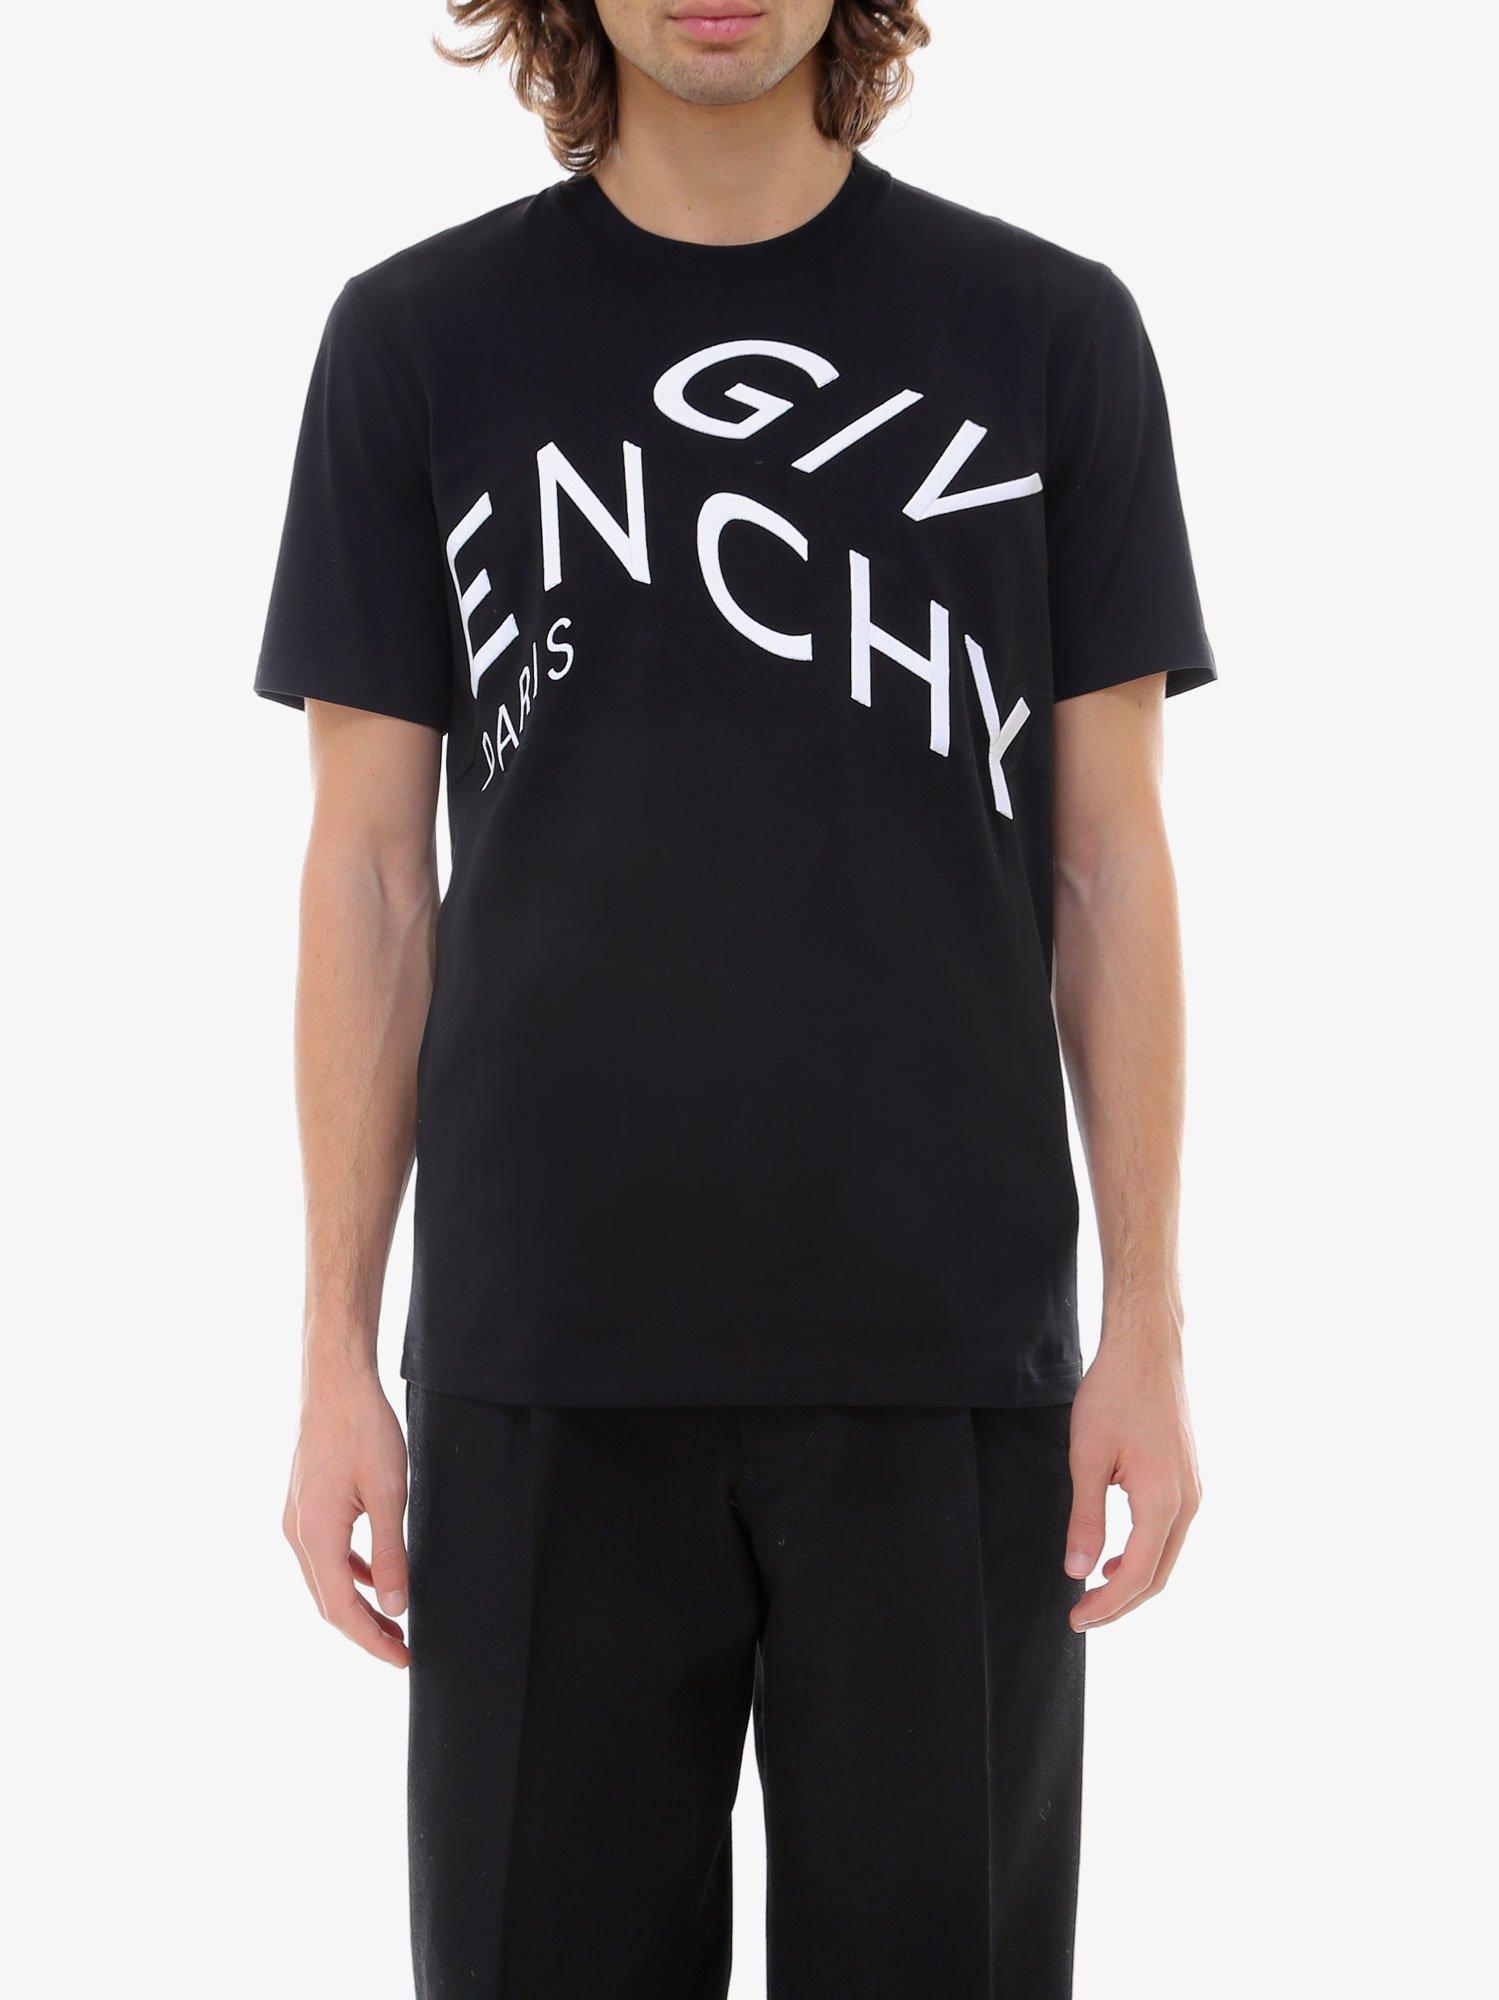 Givenchy Cotton T-shirt in Black for Men - Lyst